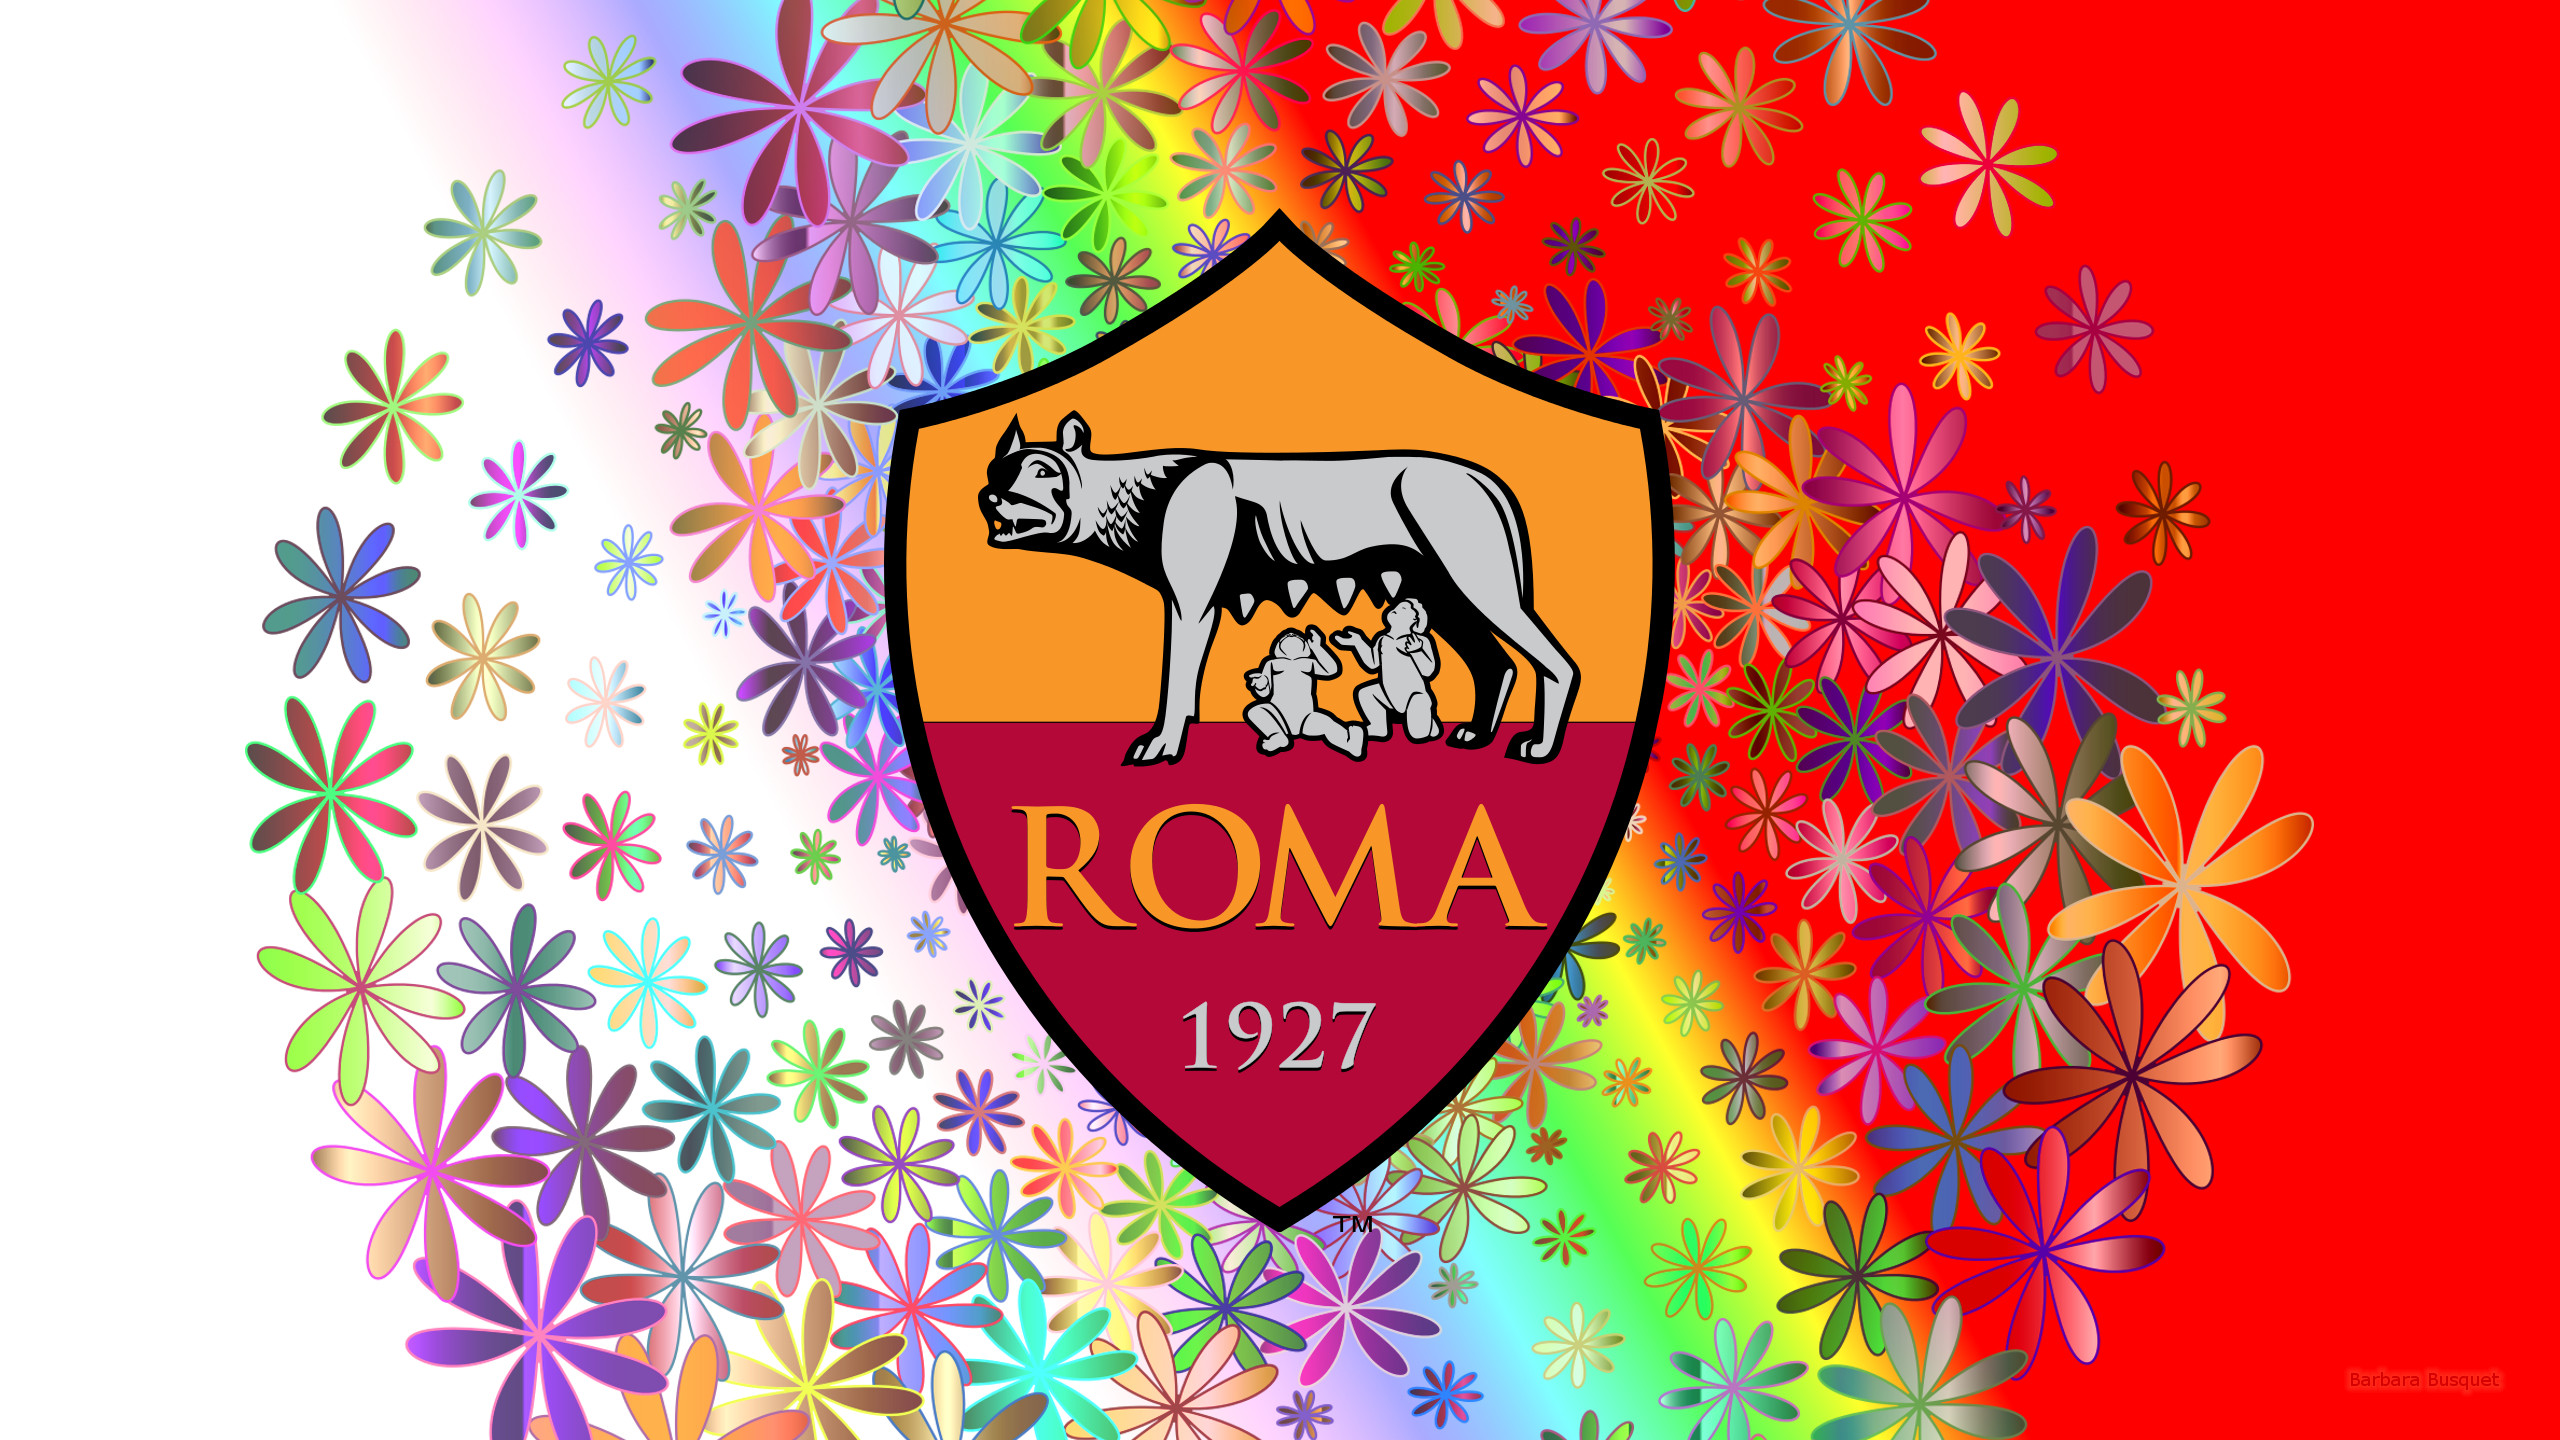 Sports A.S. Roma HD Wallpaper | Background Image